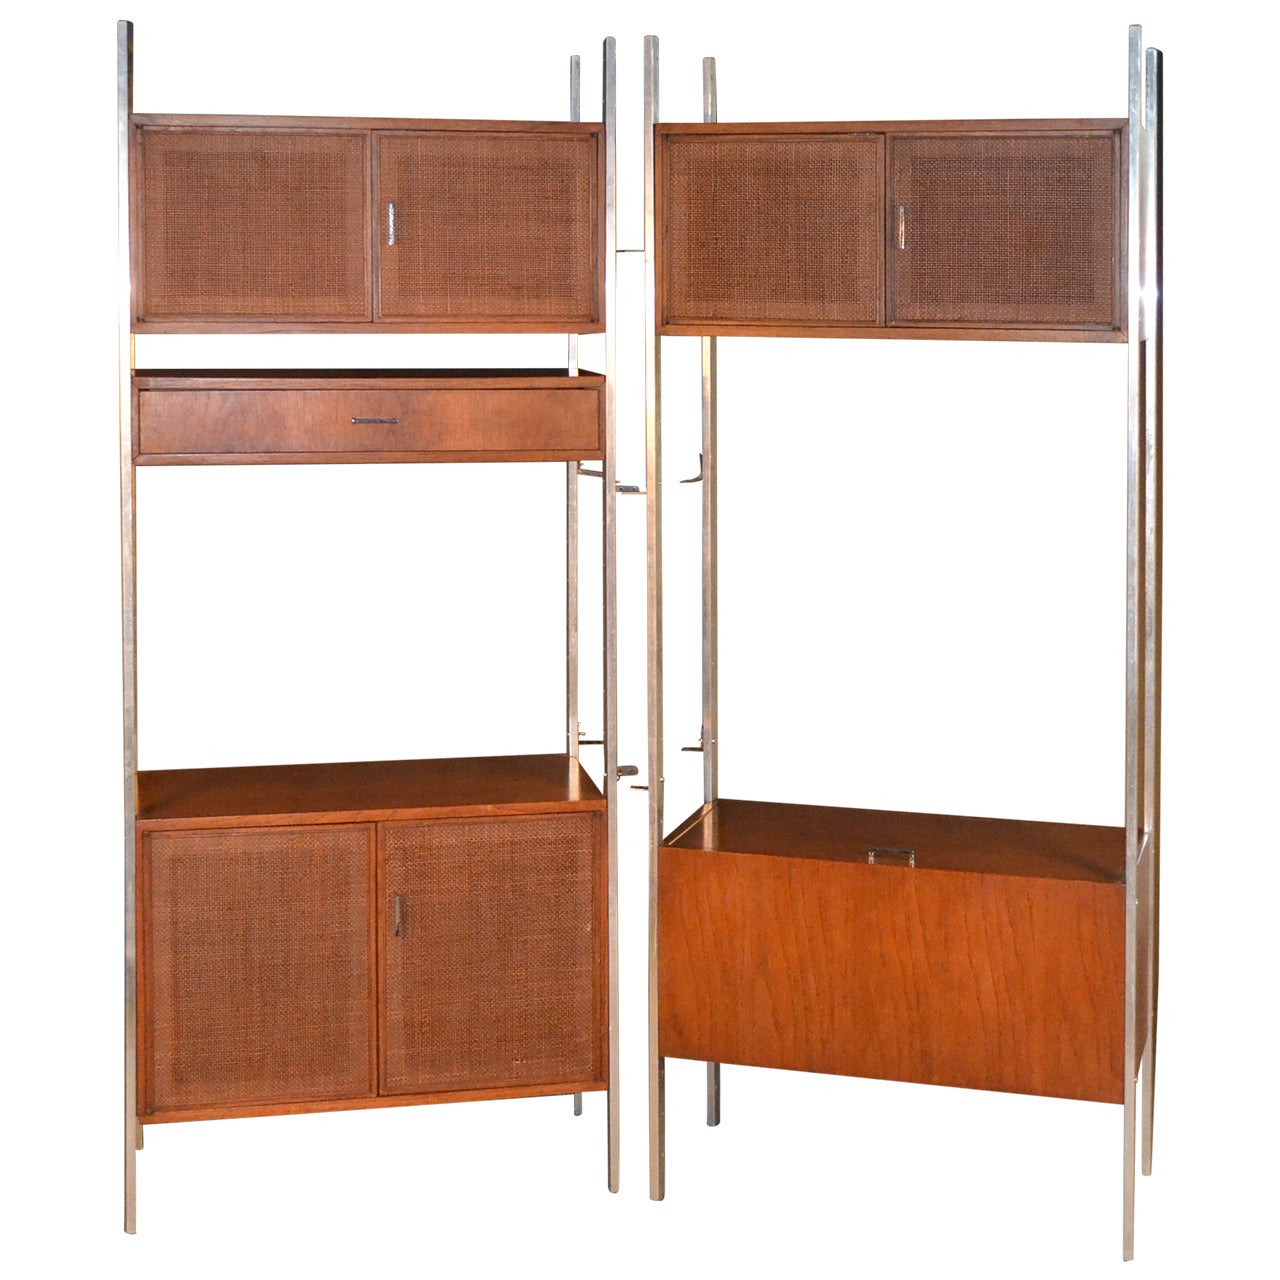 Founders Three-Section Standing Wall Unit